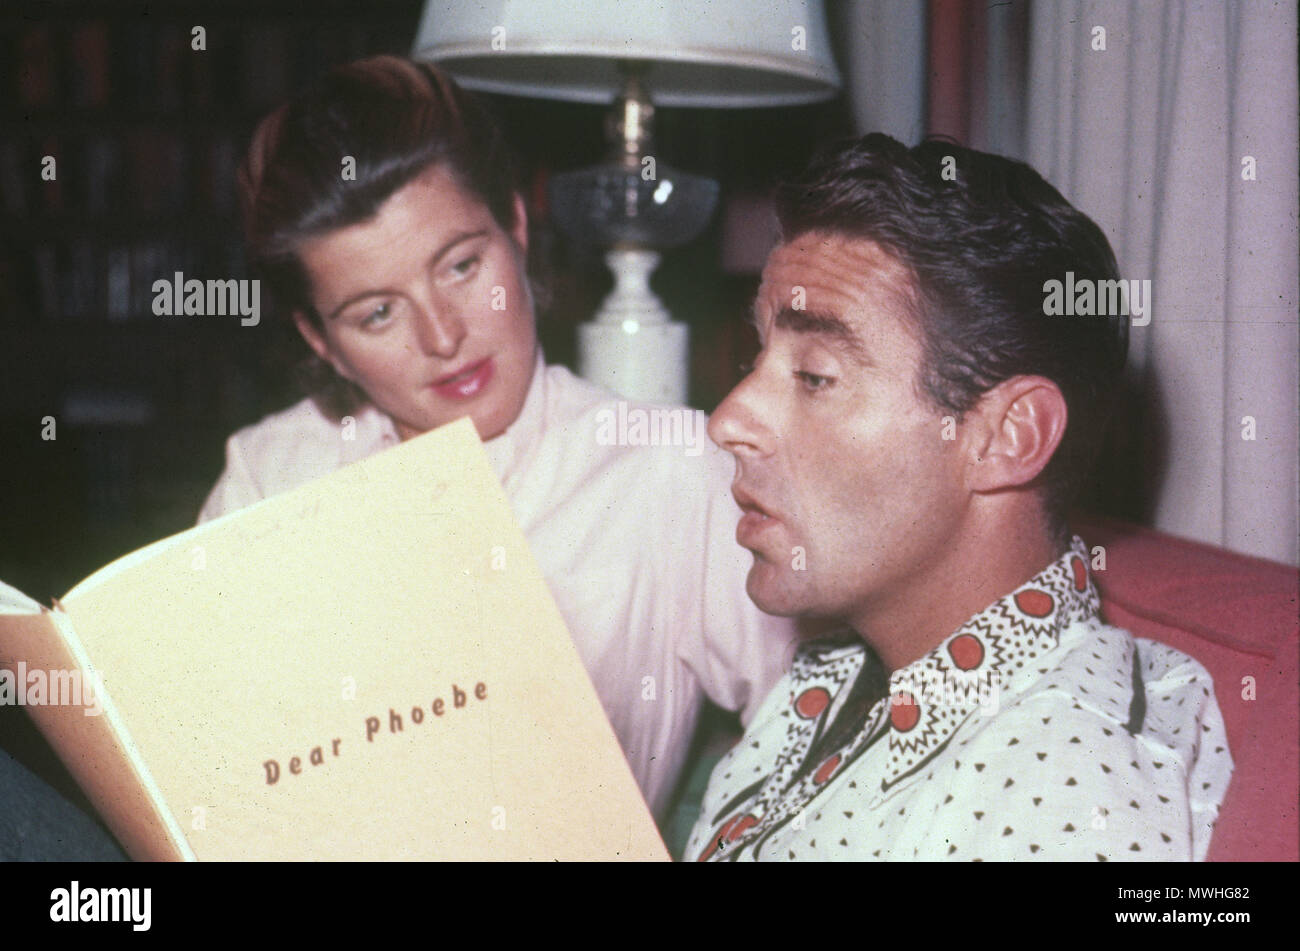 PETER LAWFORD (1923-1984) Anglo-American film actor with his first wife Patricia in 1954. He is reading the script of his film Dear Phoebe produced that year. Stock Photo